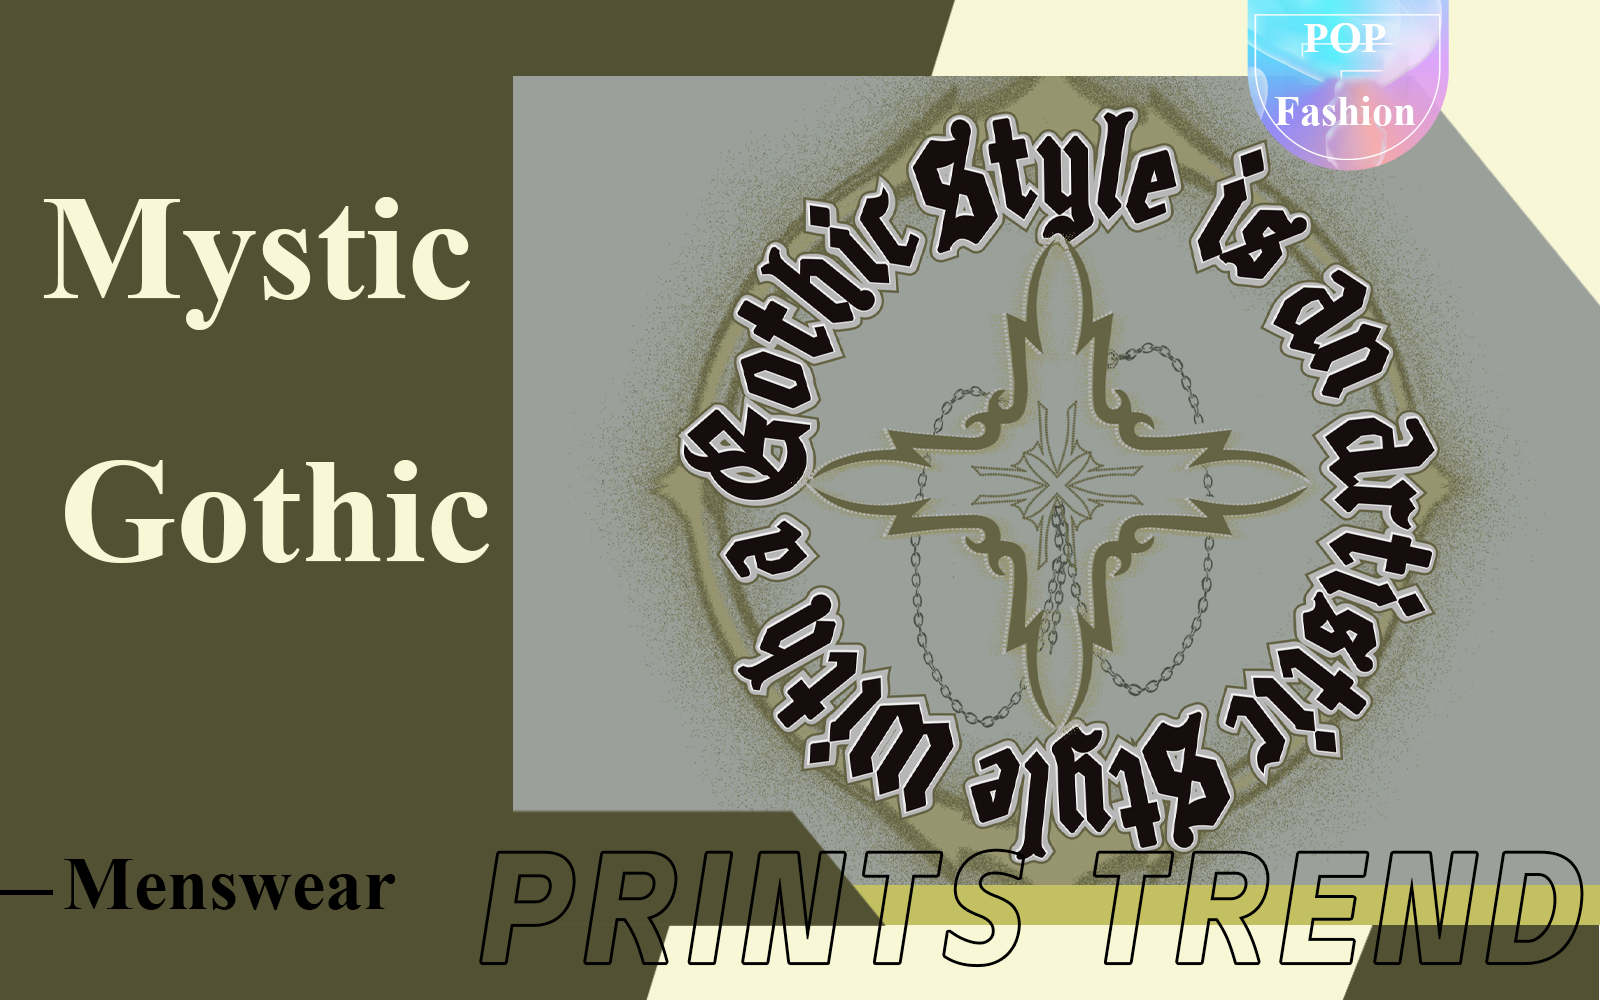 Mystic Gothic -- The Pattern Trend for Menswear